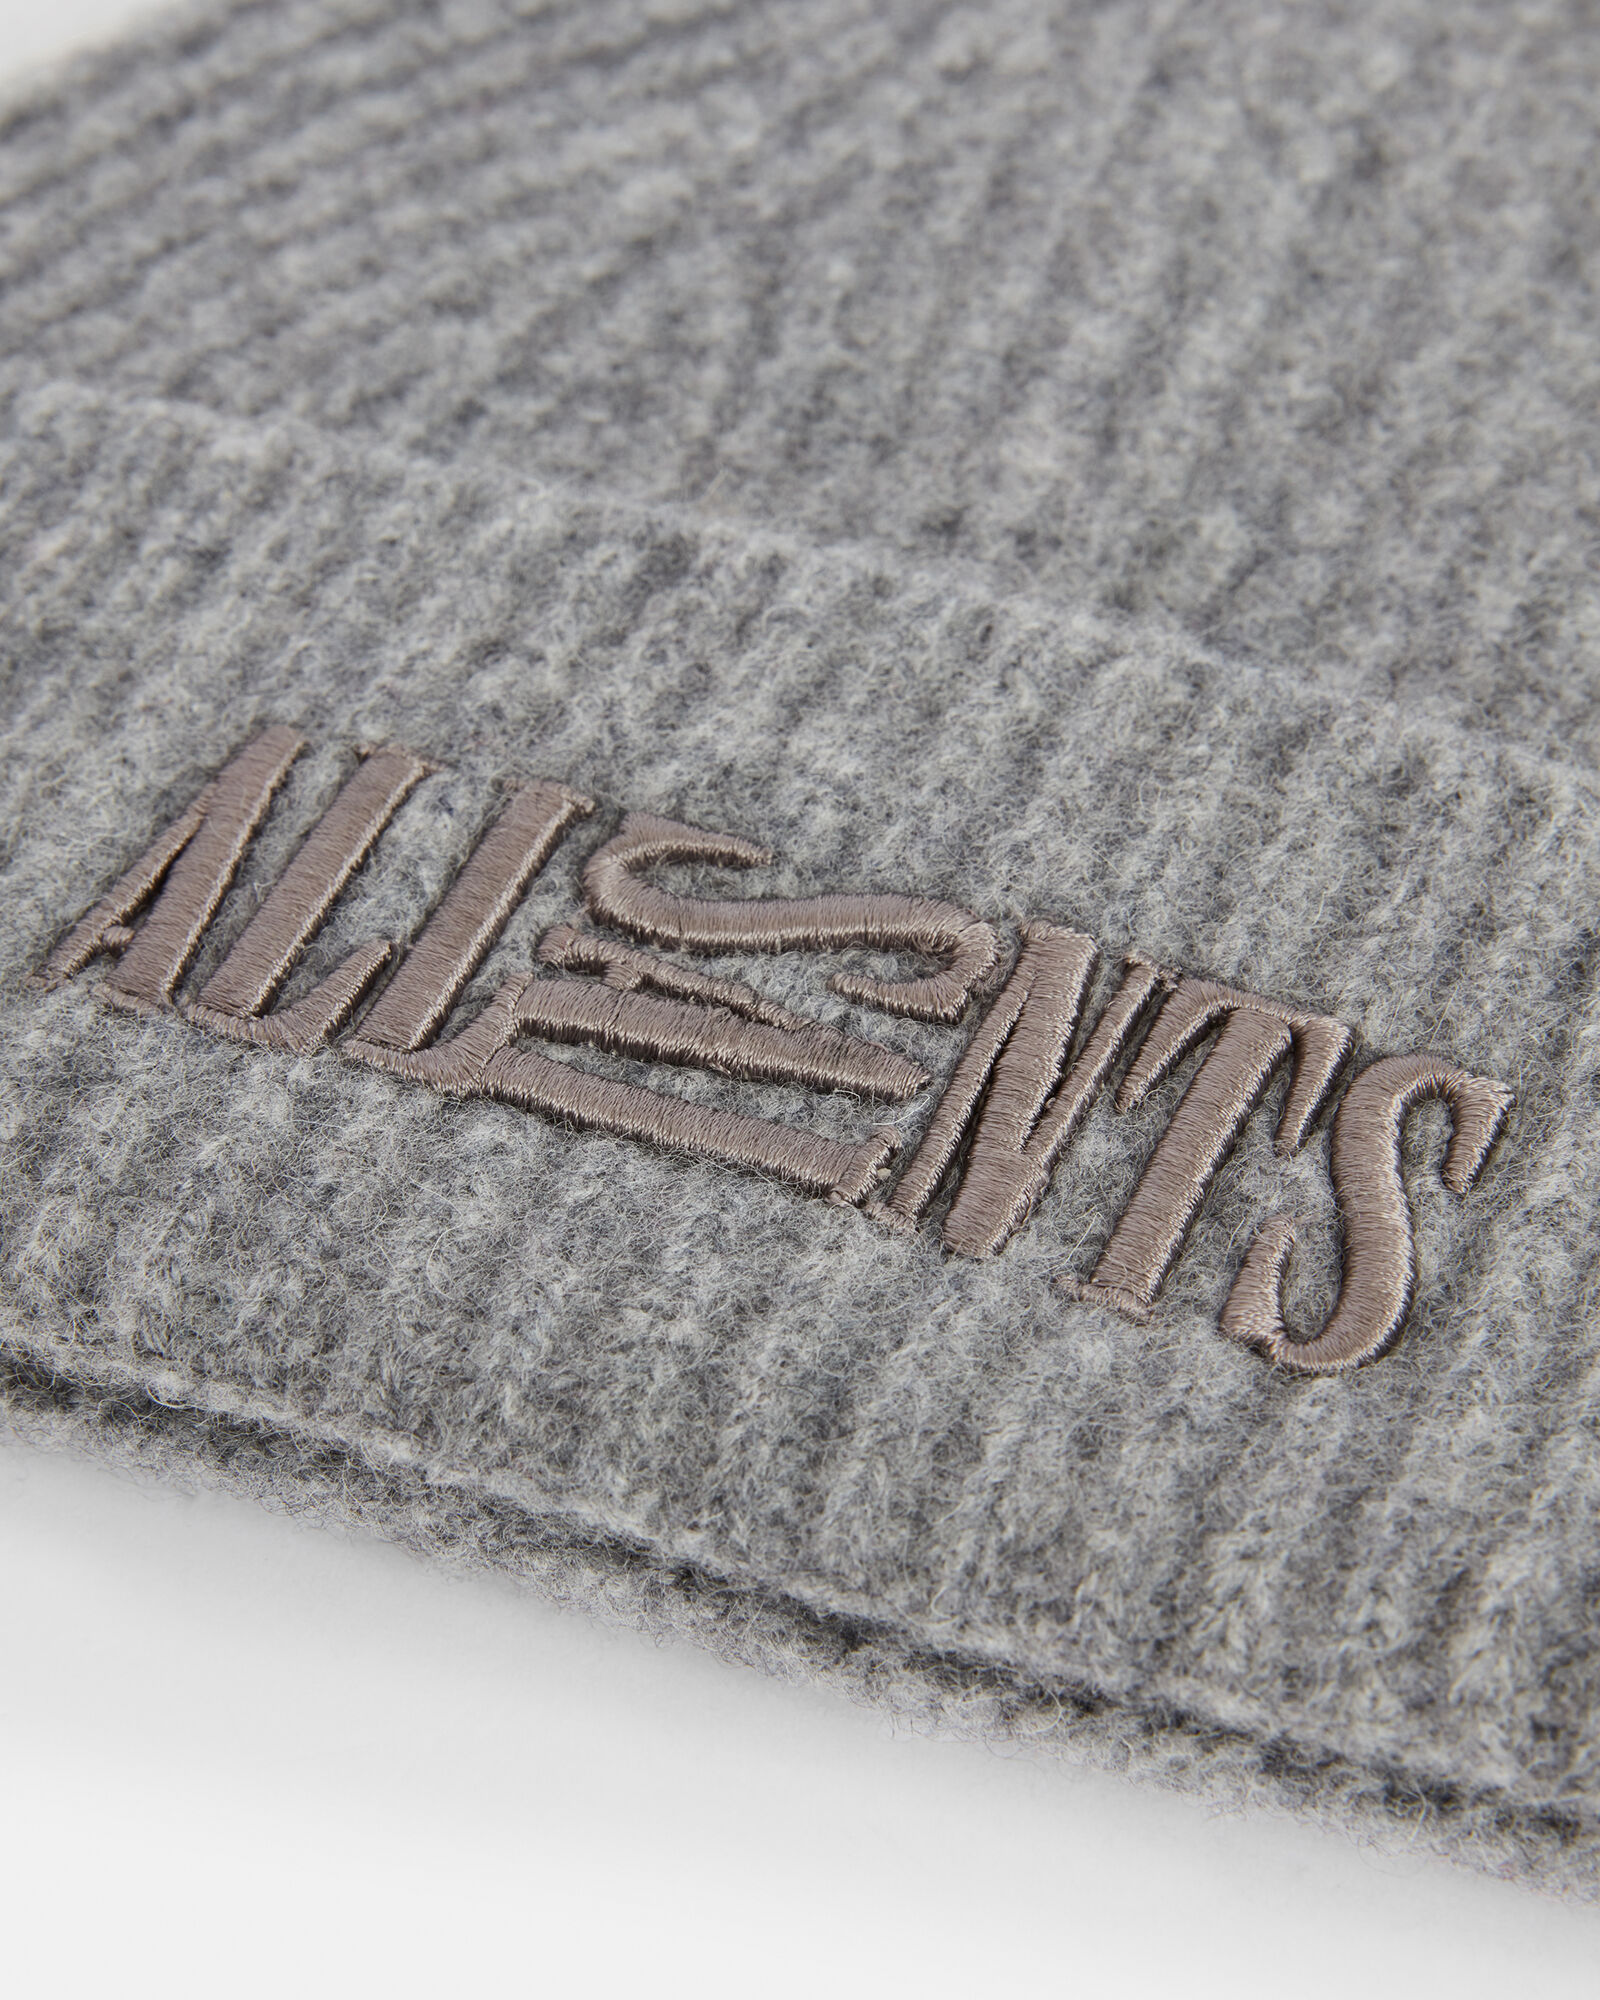 Oppose Boiled Wool Embroidered Beanie Grey Marl | ALLSAINTS US